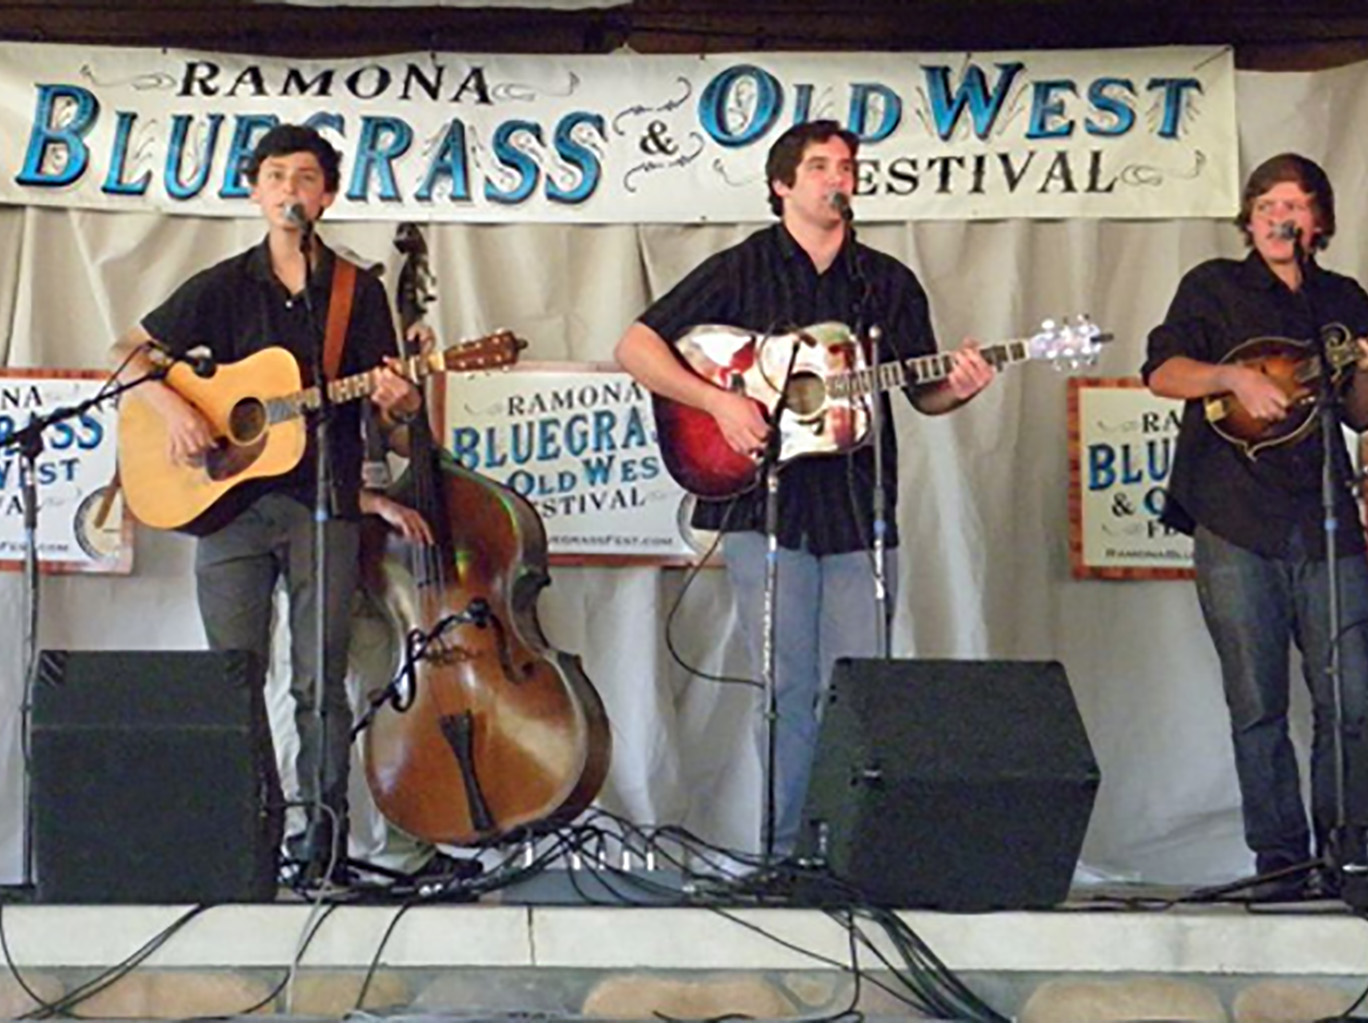 Ramona Bluegrass and Old West Festival